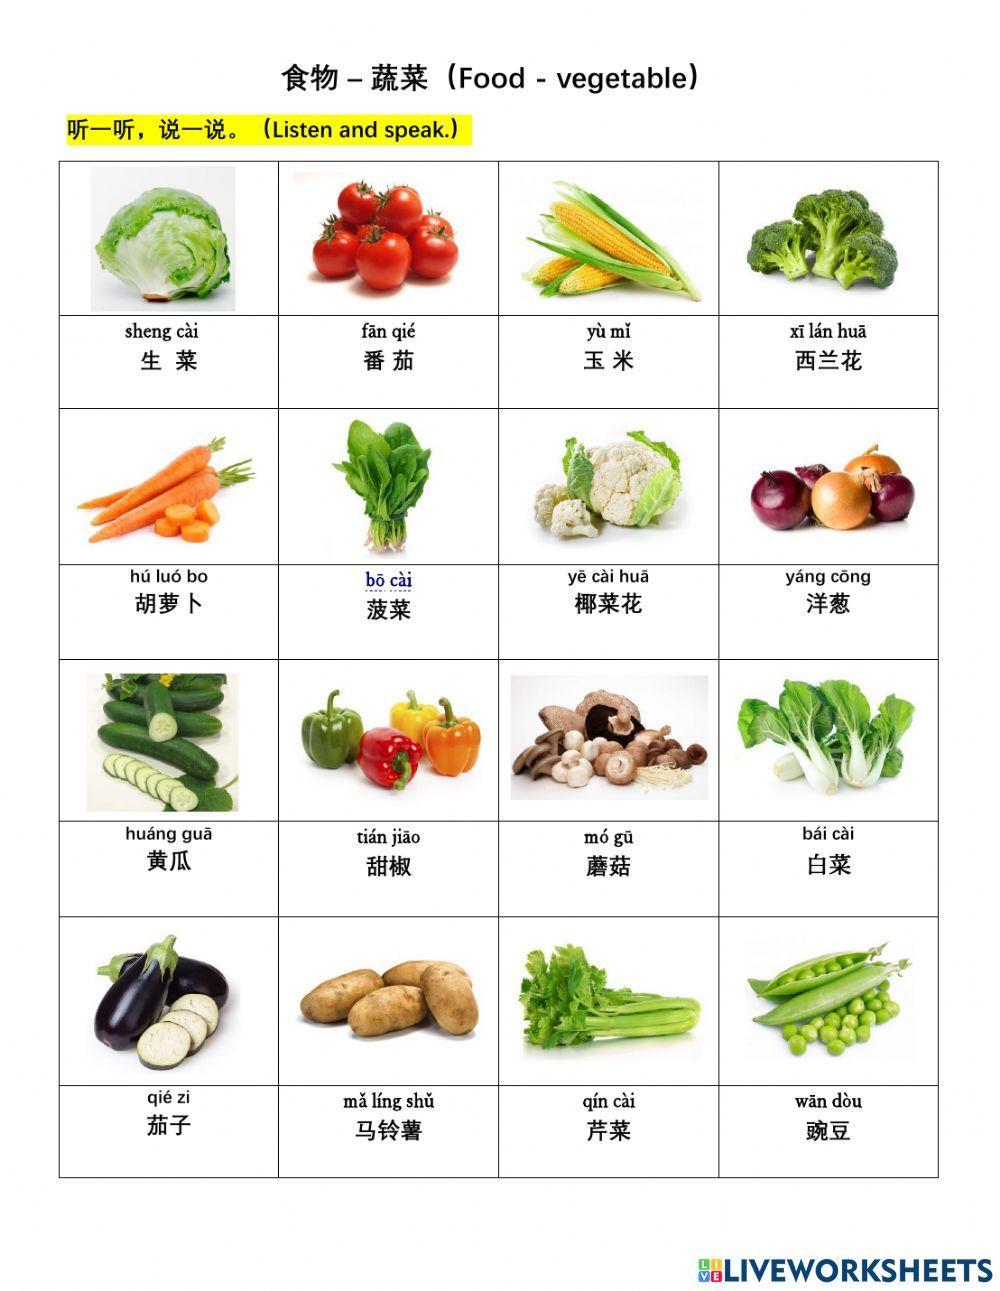 Food - vegetables in Chinese